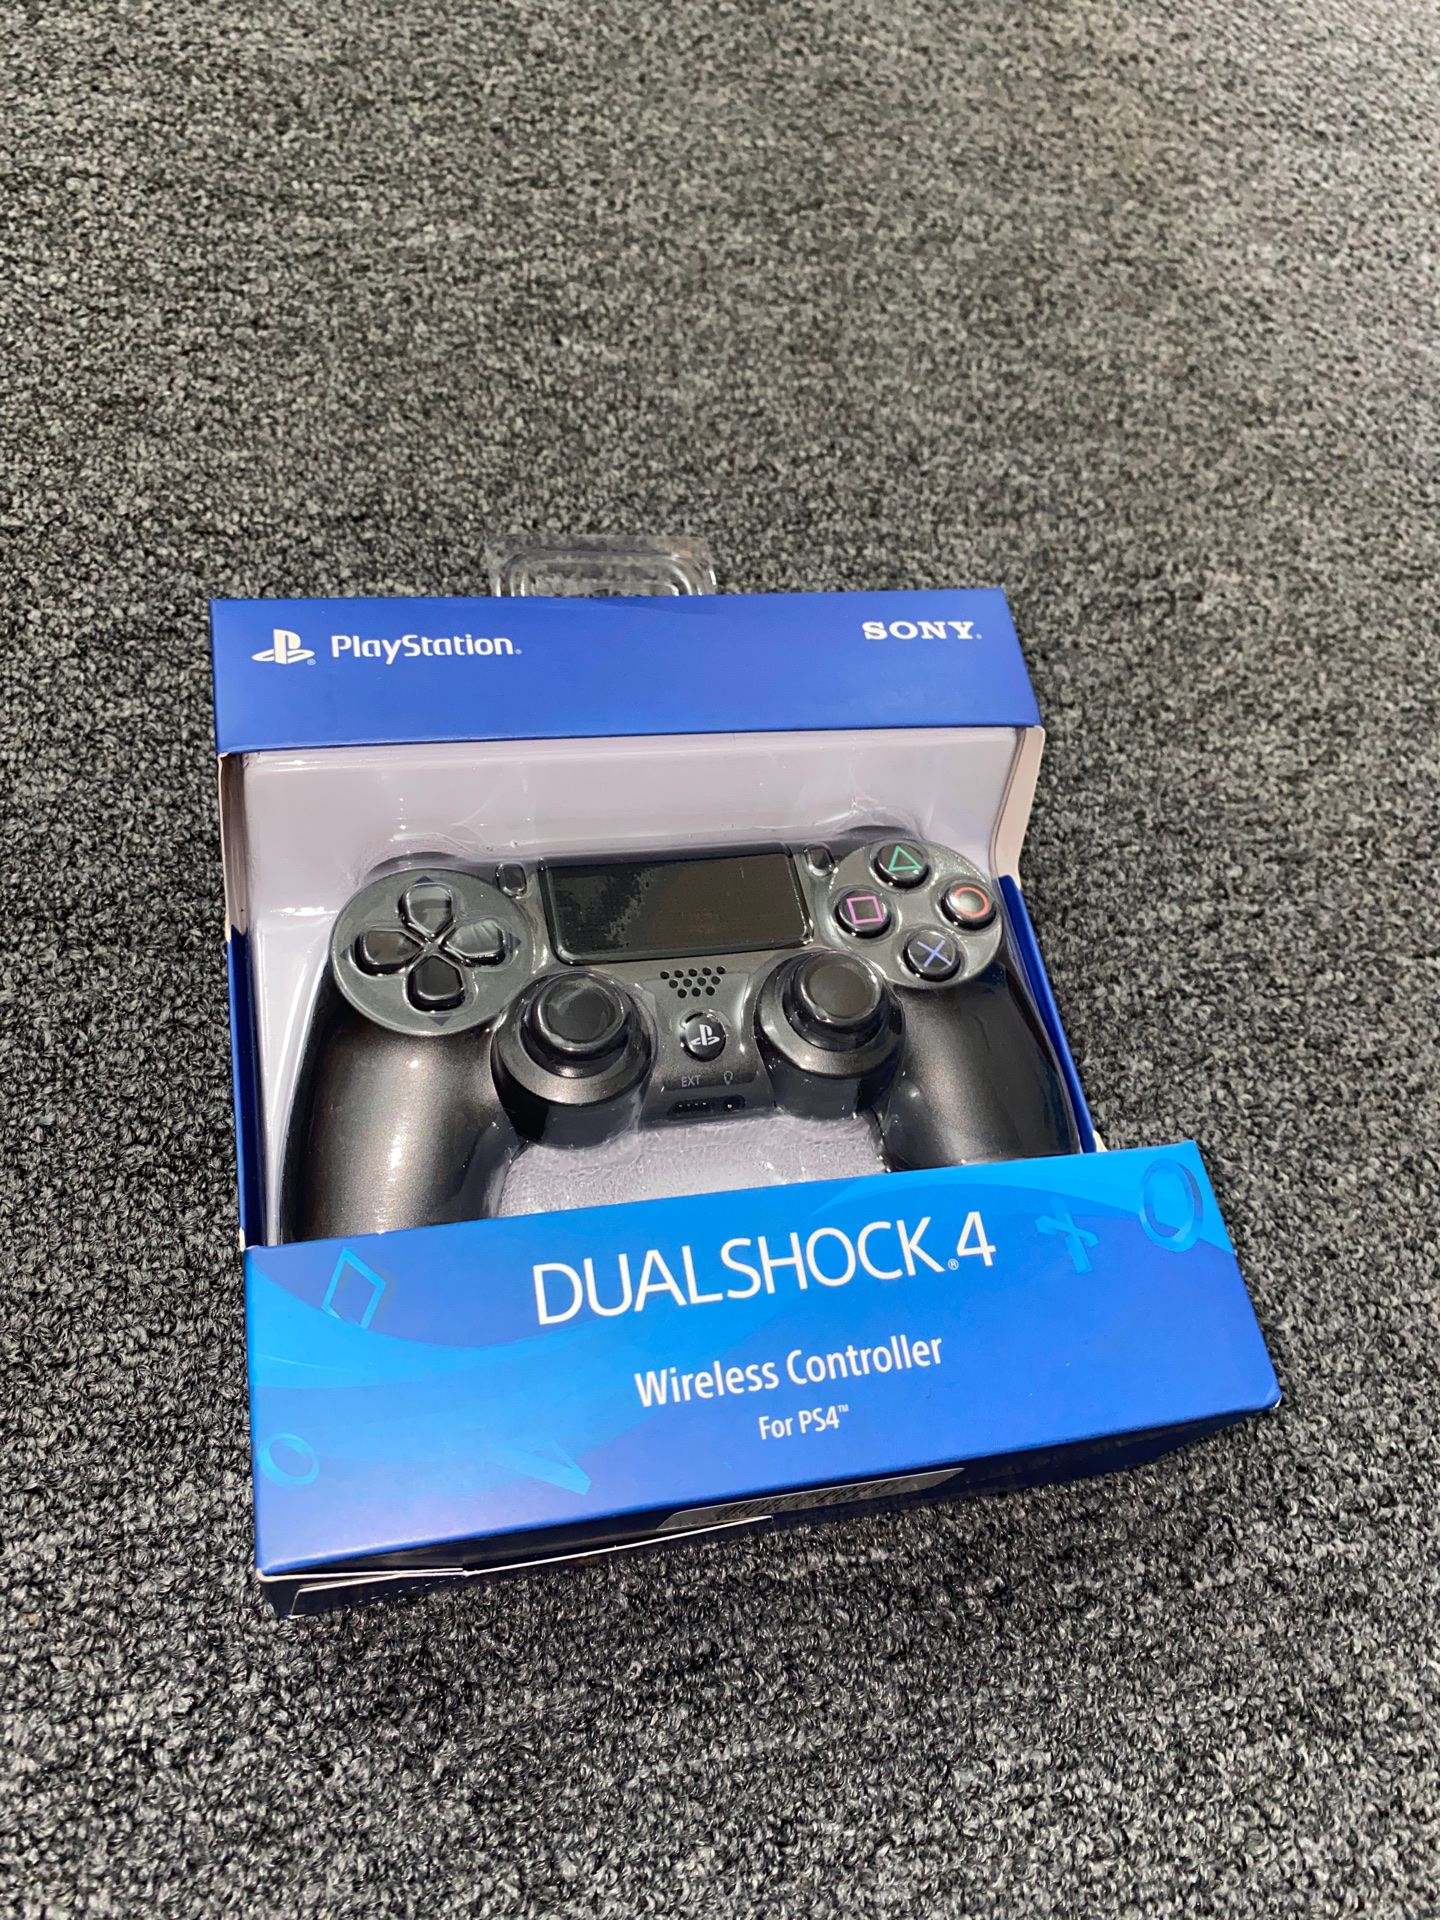 ⚠️ NEW PS4 STEEL BLACK CONTROLLER $55 FIRM ⚠️